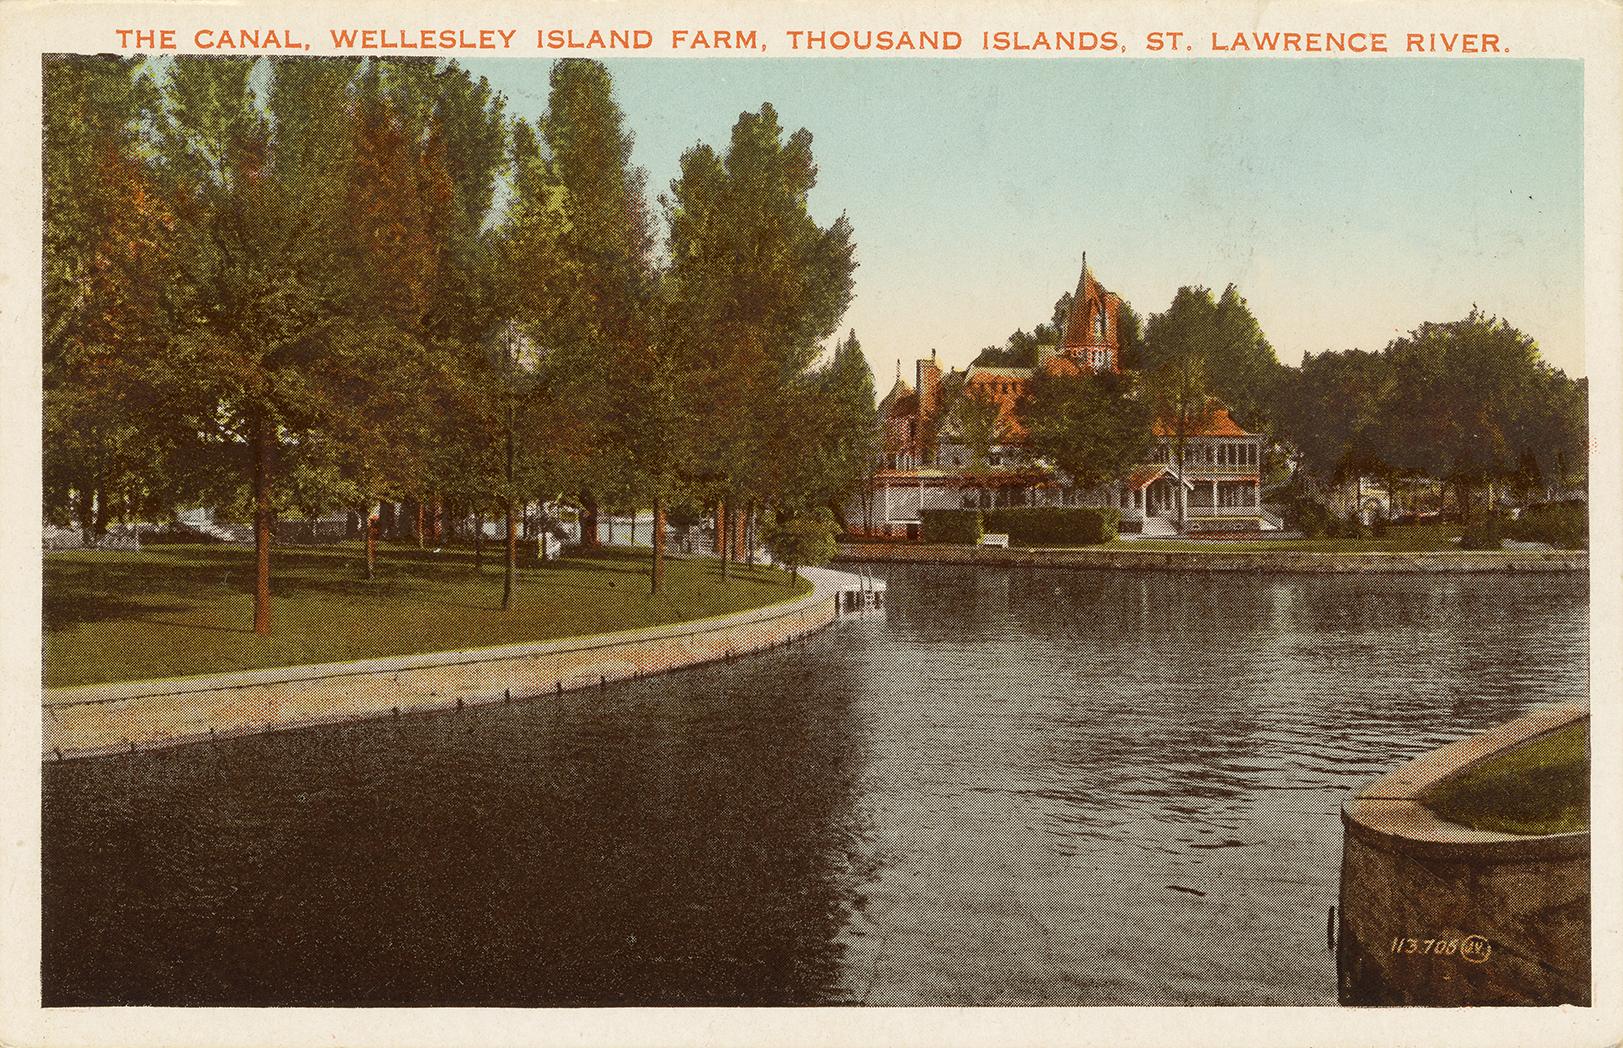 Colorized photograph of a large house built on a small island in the middle of a wide river.